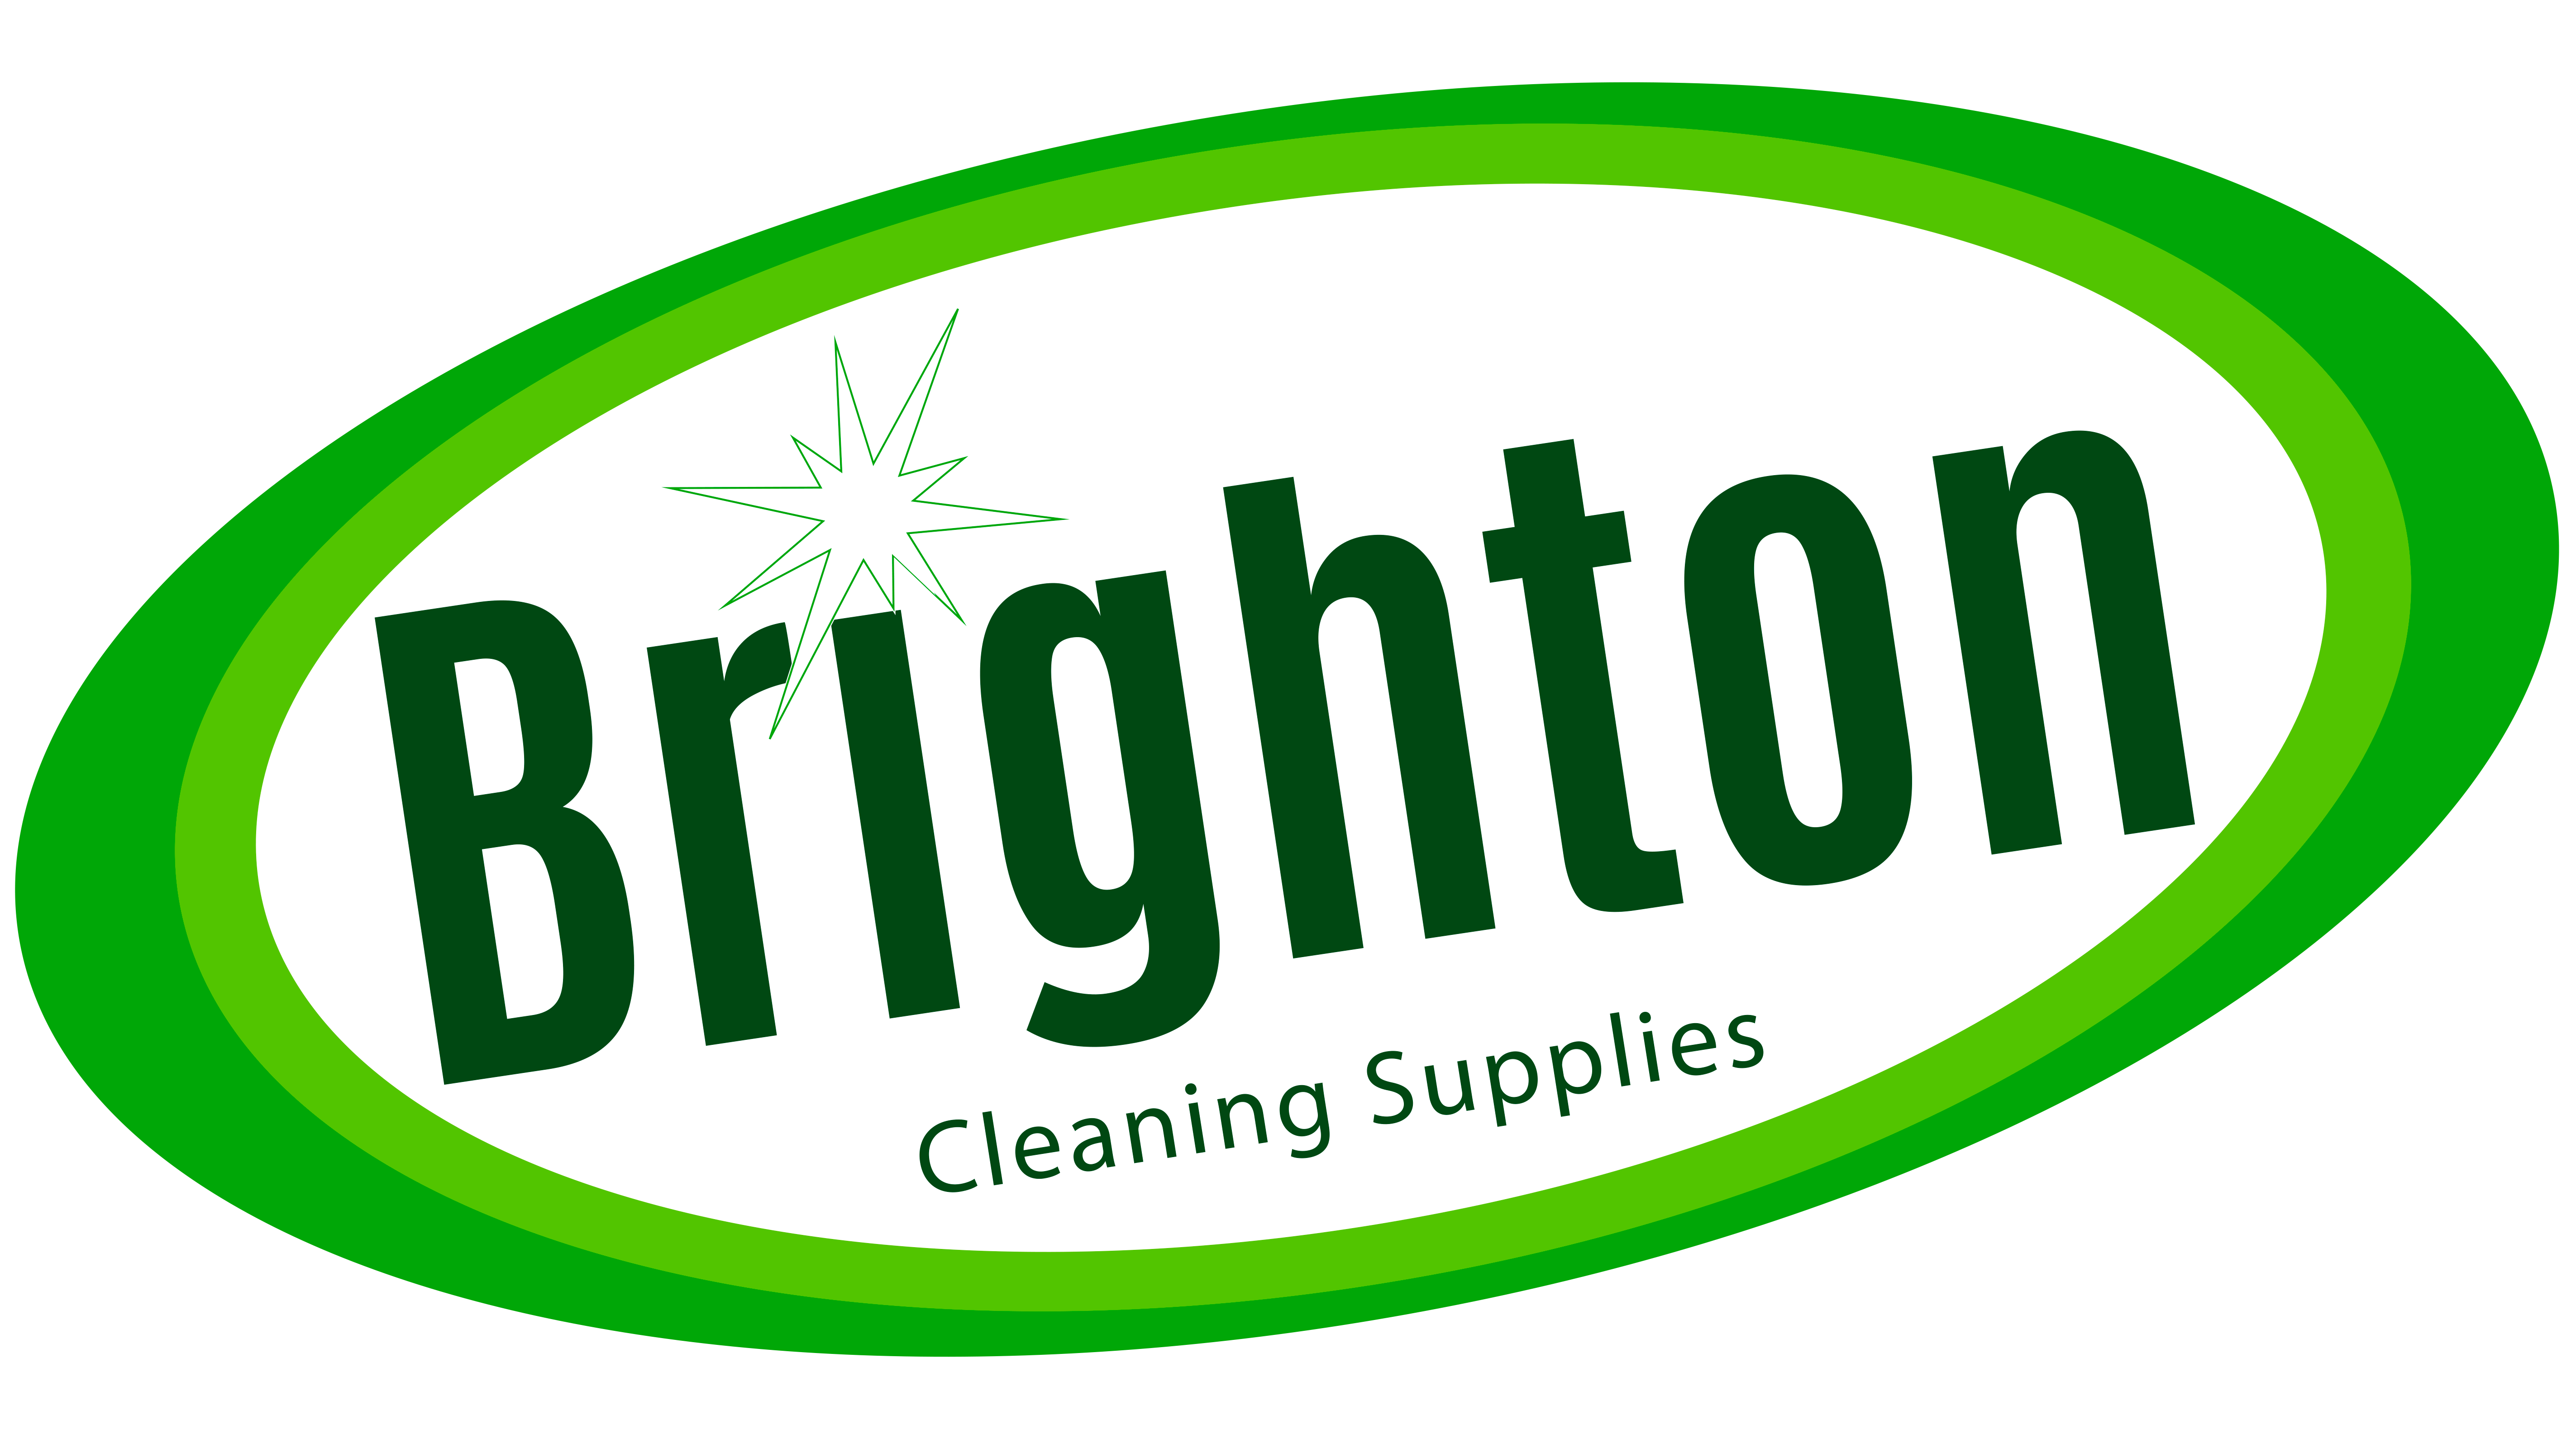 Brite Tile & Grout Cleaner – Brighton Cleaning Supplies